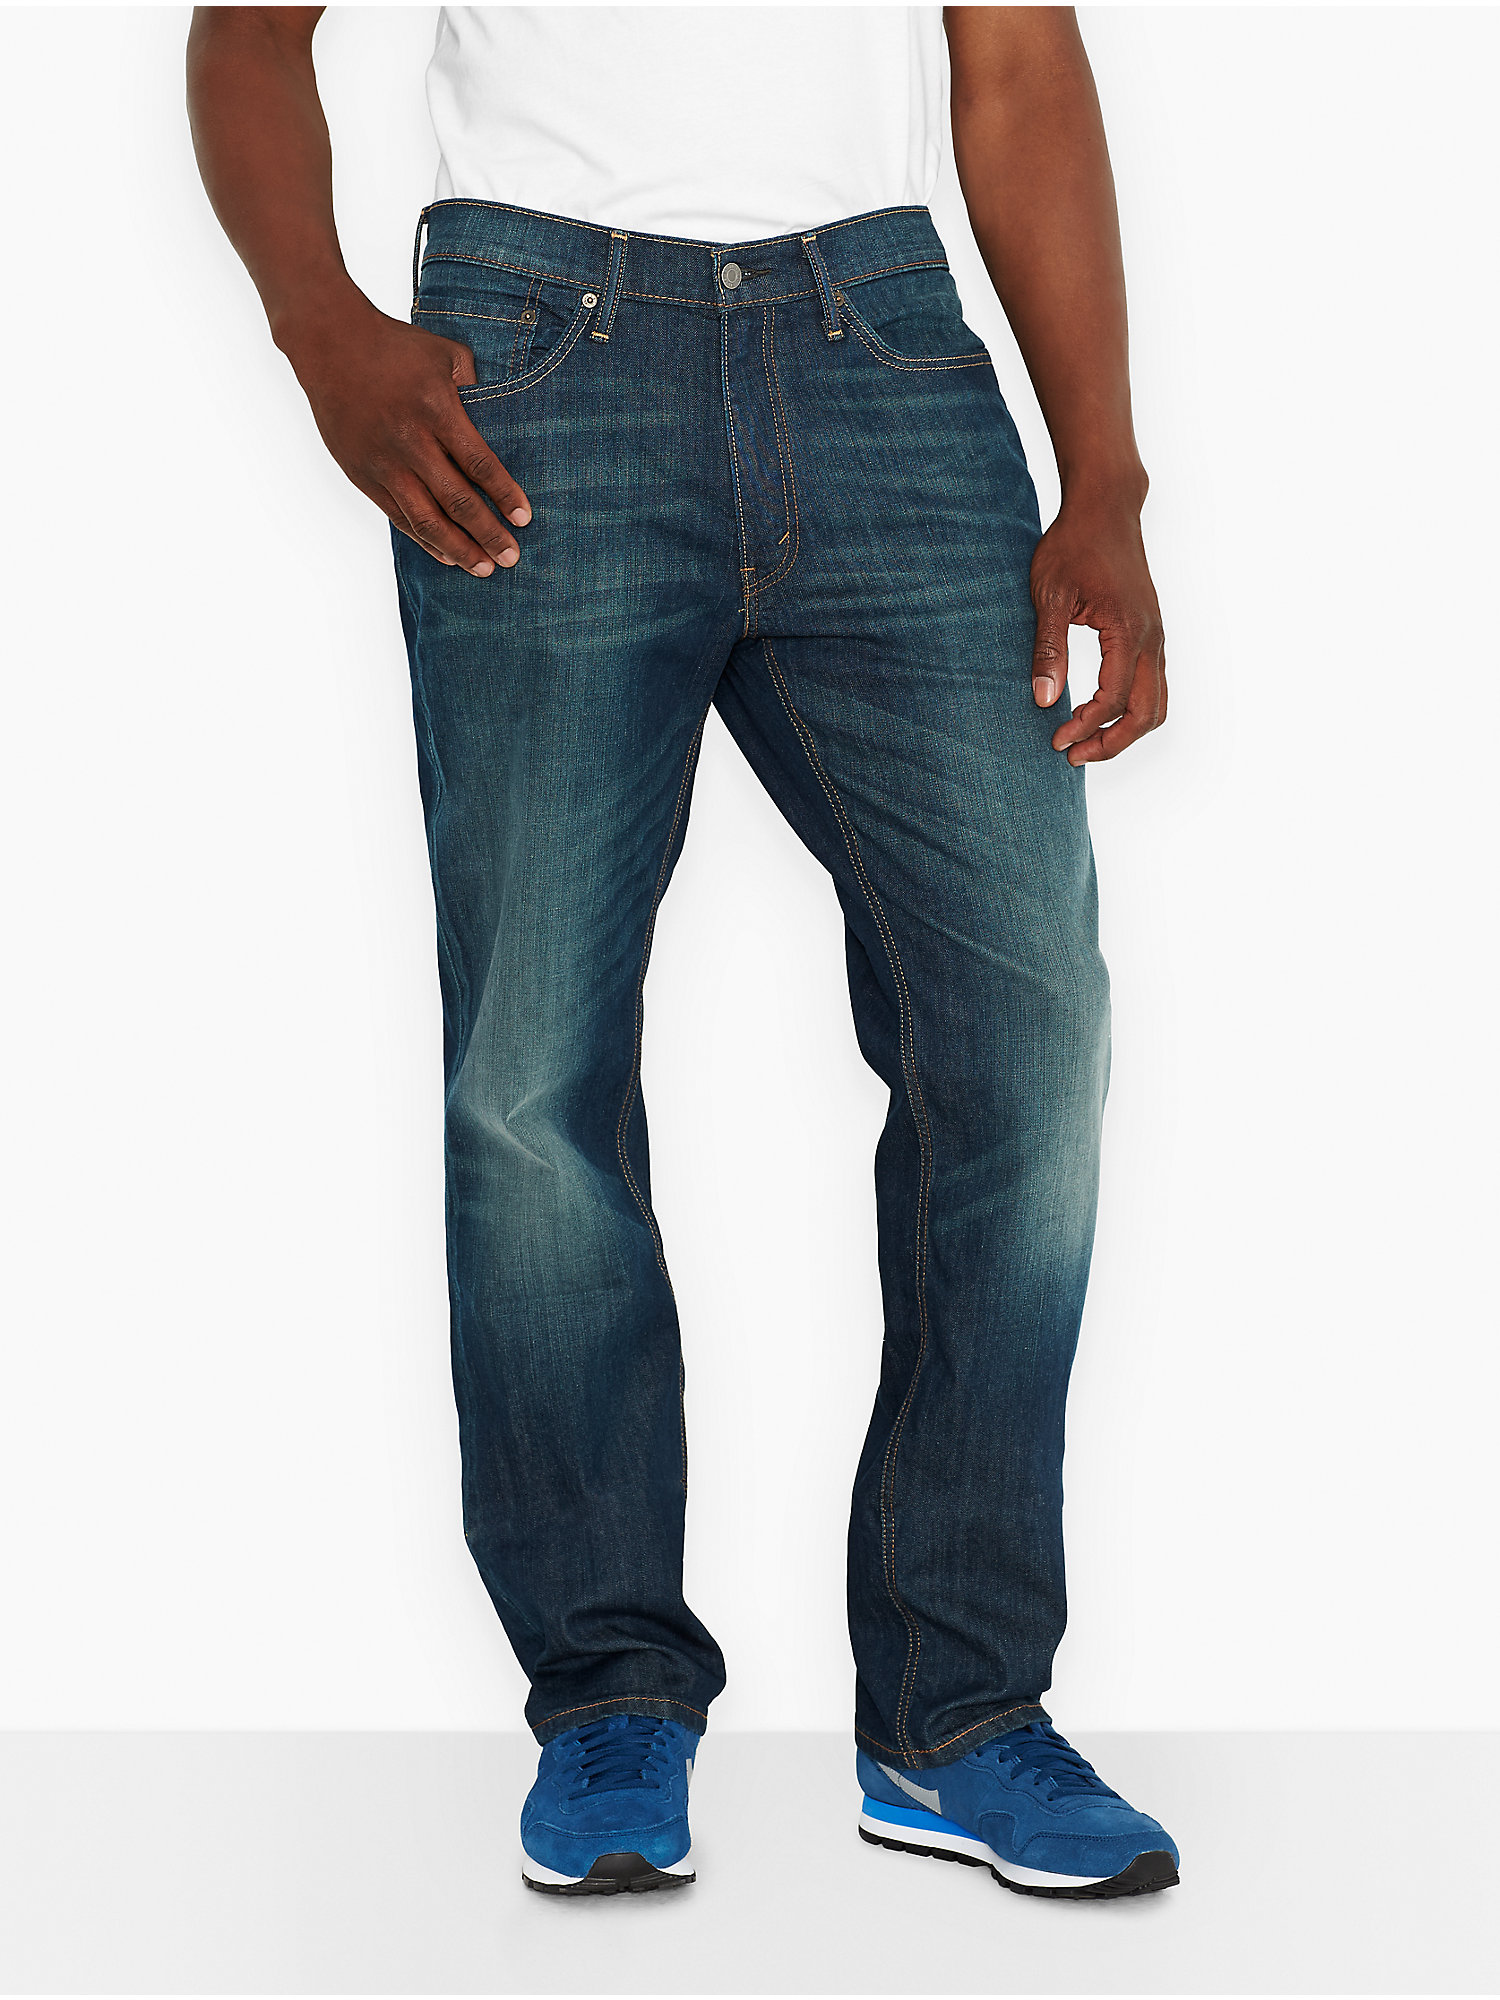 Levi's Men's Big & Tall 541 Athletic Fit Taper Jeans - image 1 of 7